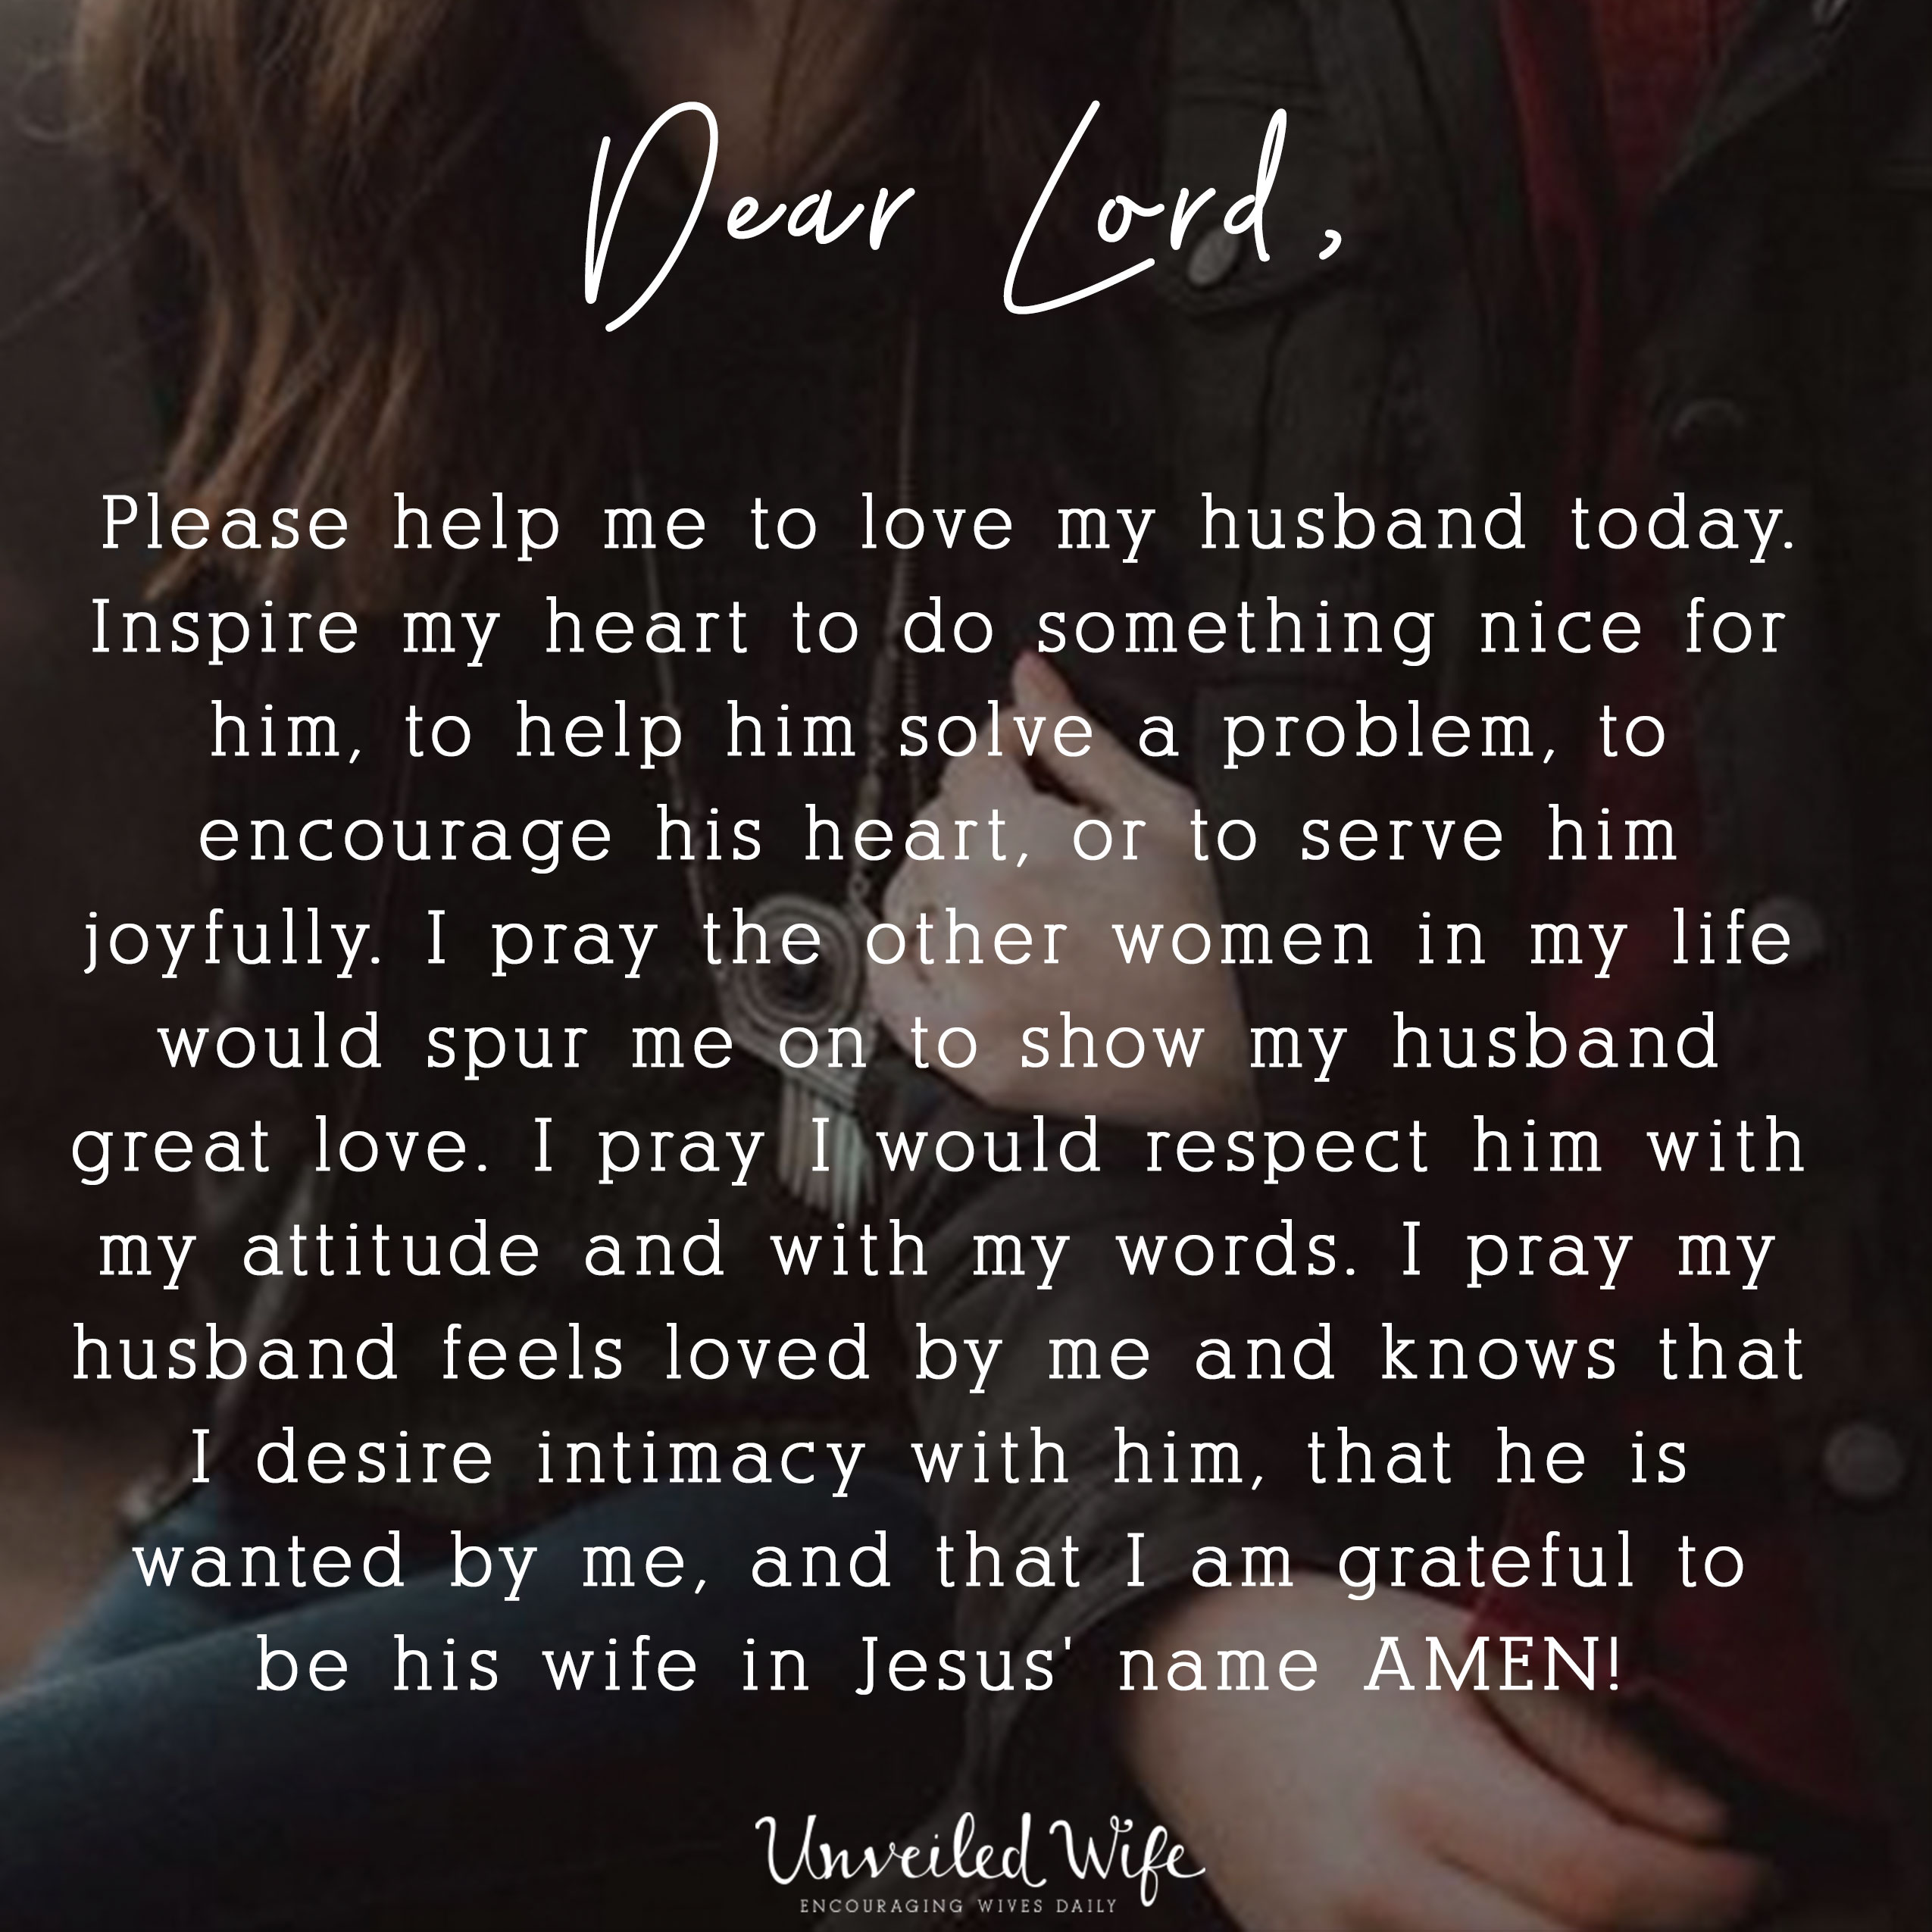 how to pray for a man that you love